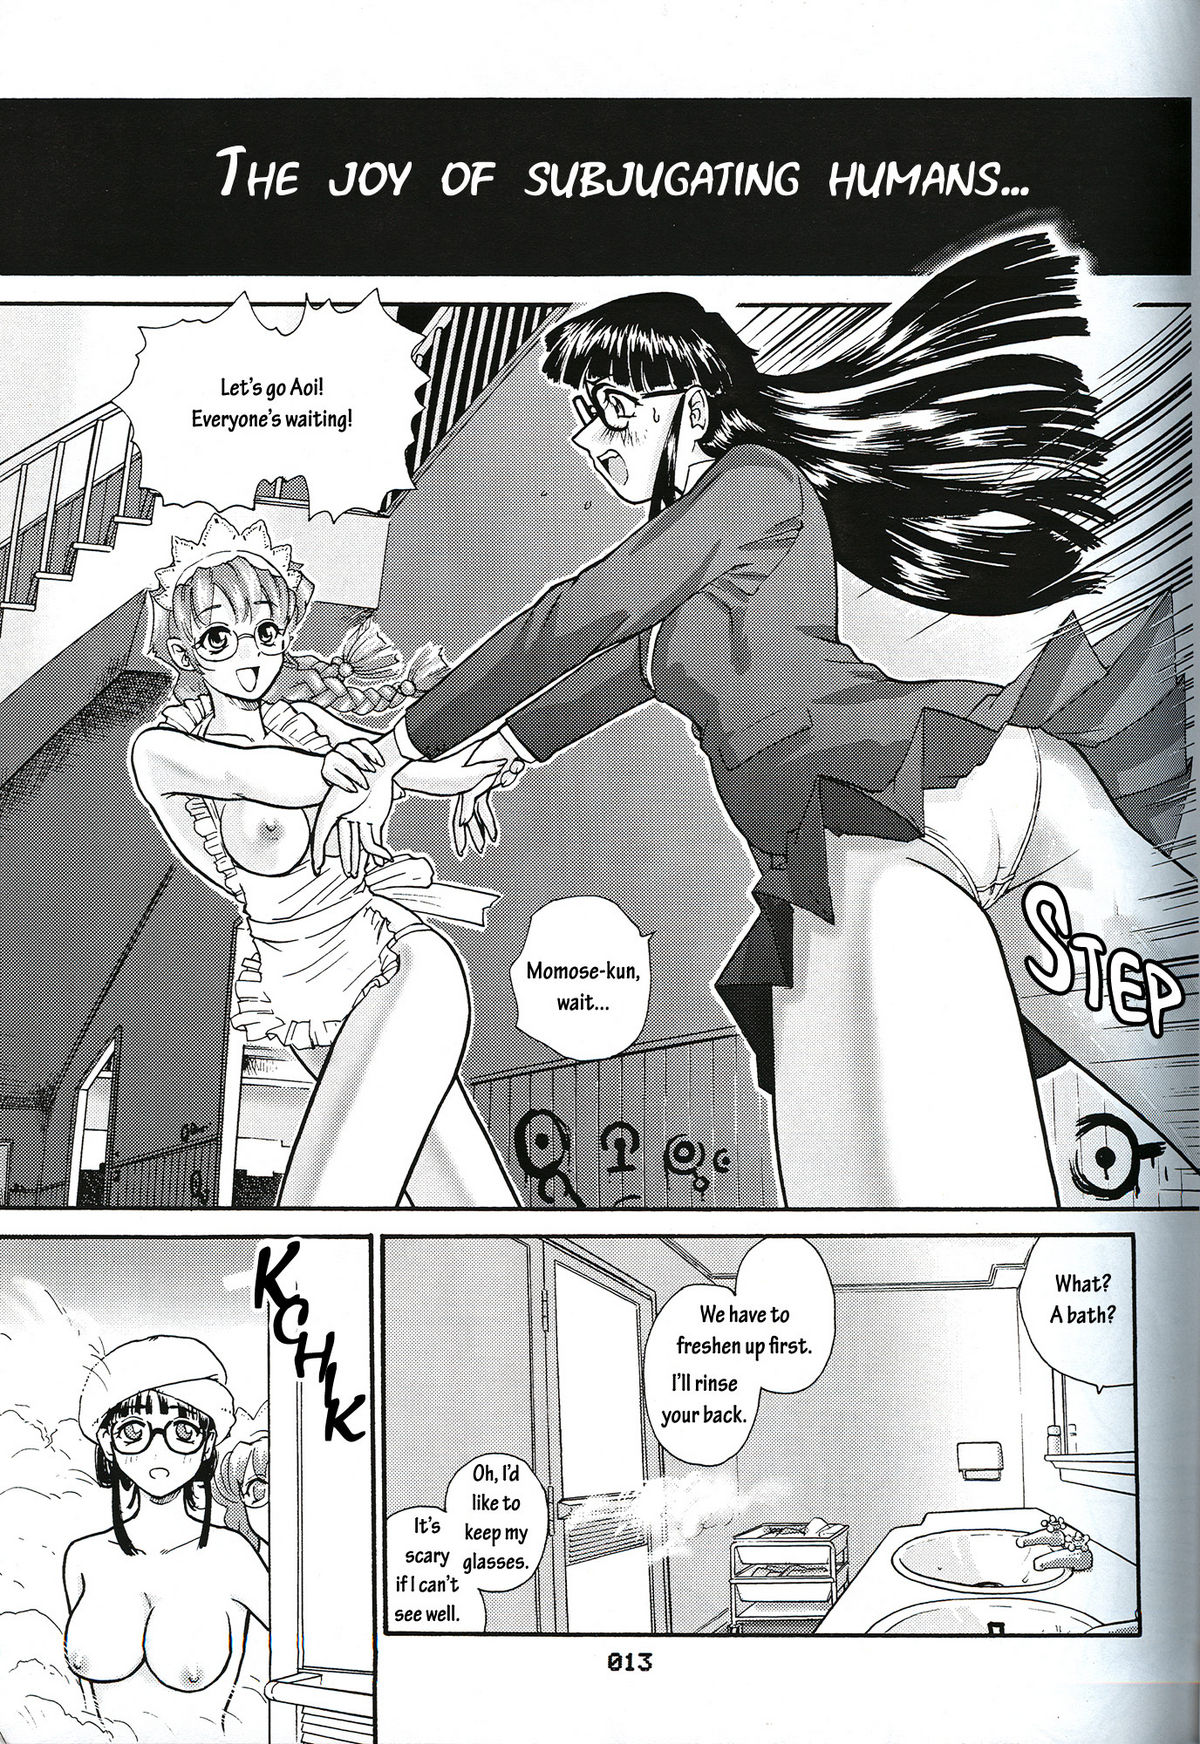 (SC19) [Behind Moon (Q)] Dulce Report 3 [English] page 12 full